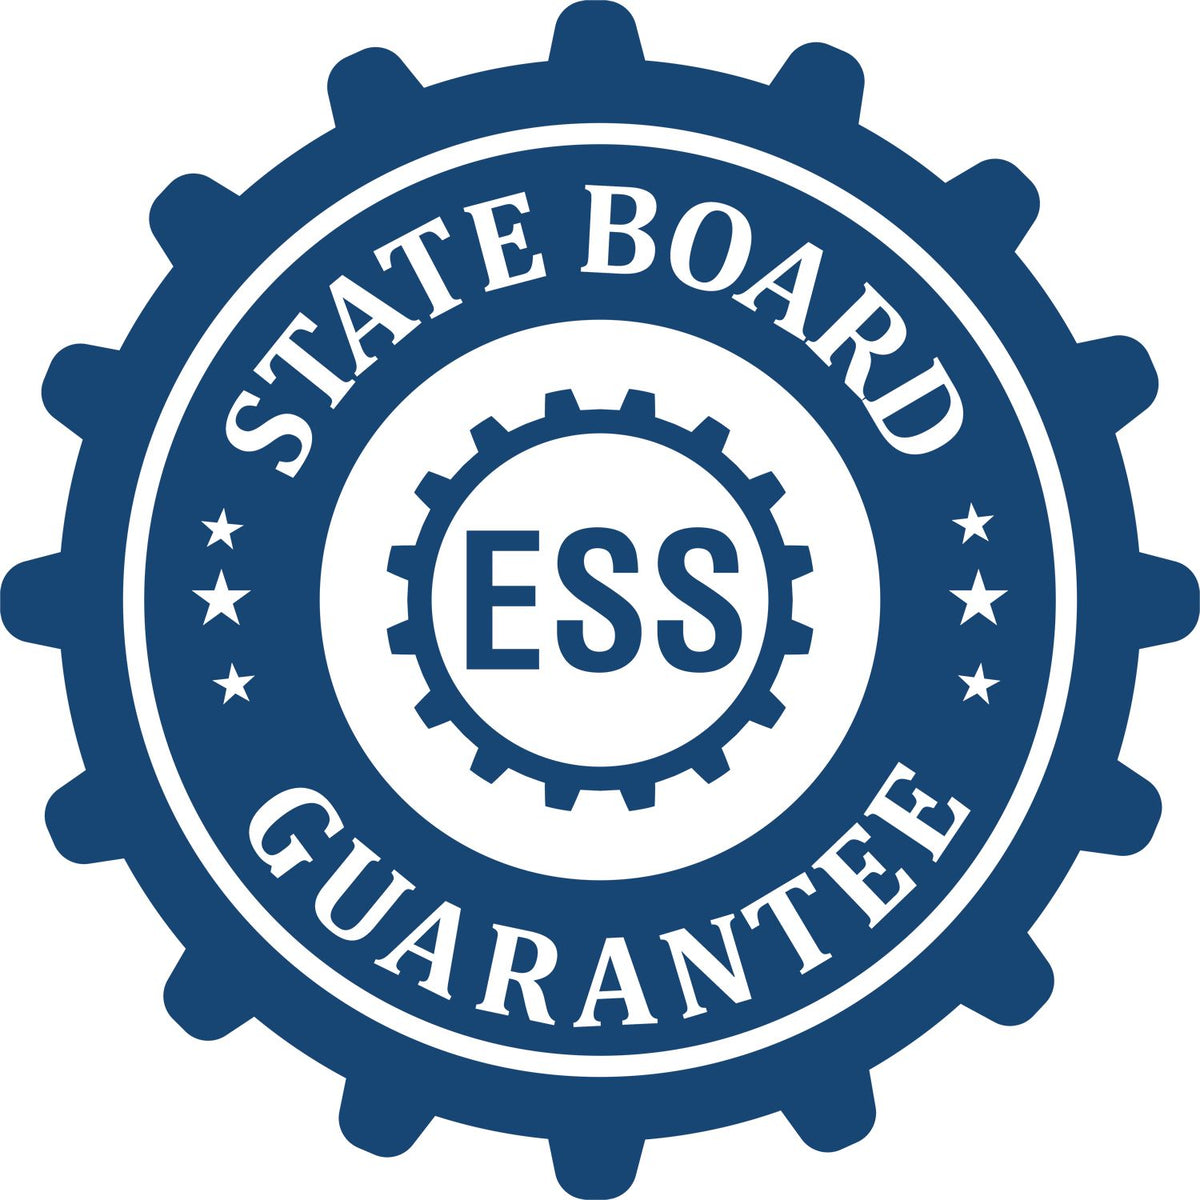 An emblem in a gear shape illustrating a state board guarantee for the Digital Nevada PE Stamp and Electronic Seal for Nevada Engineer product.